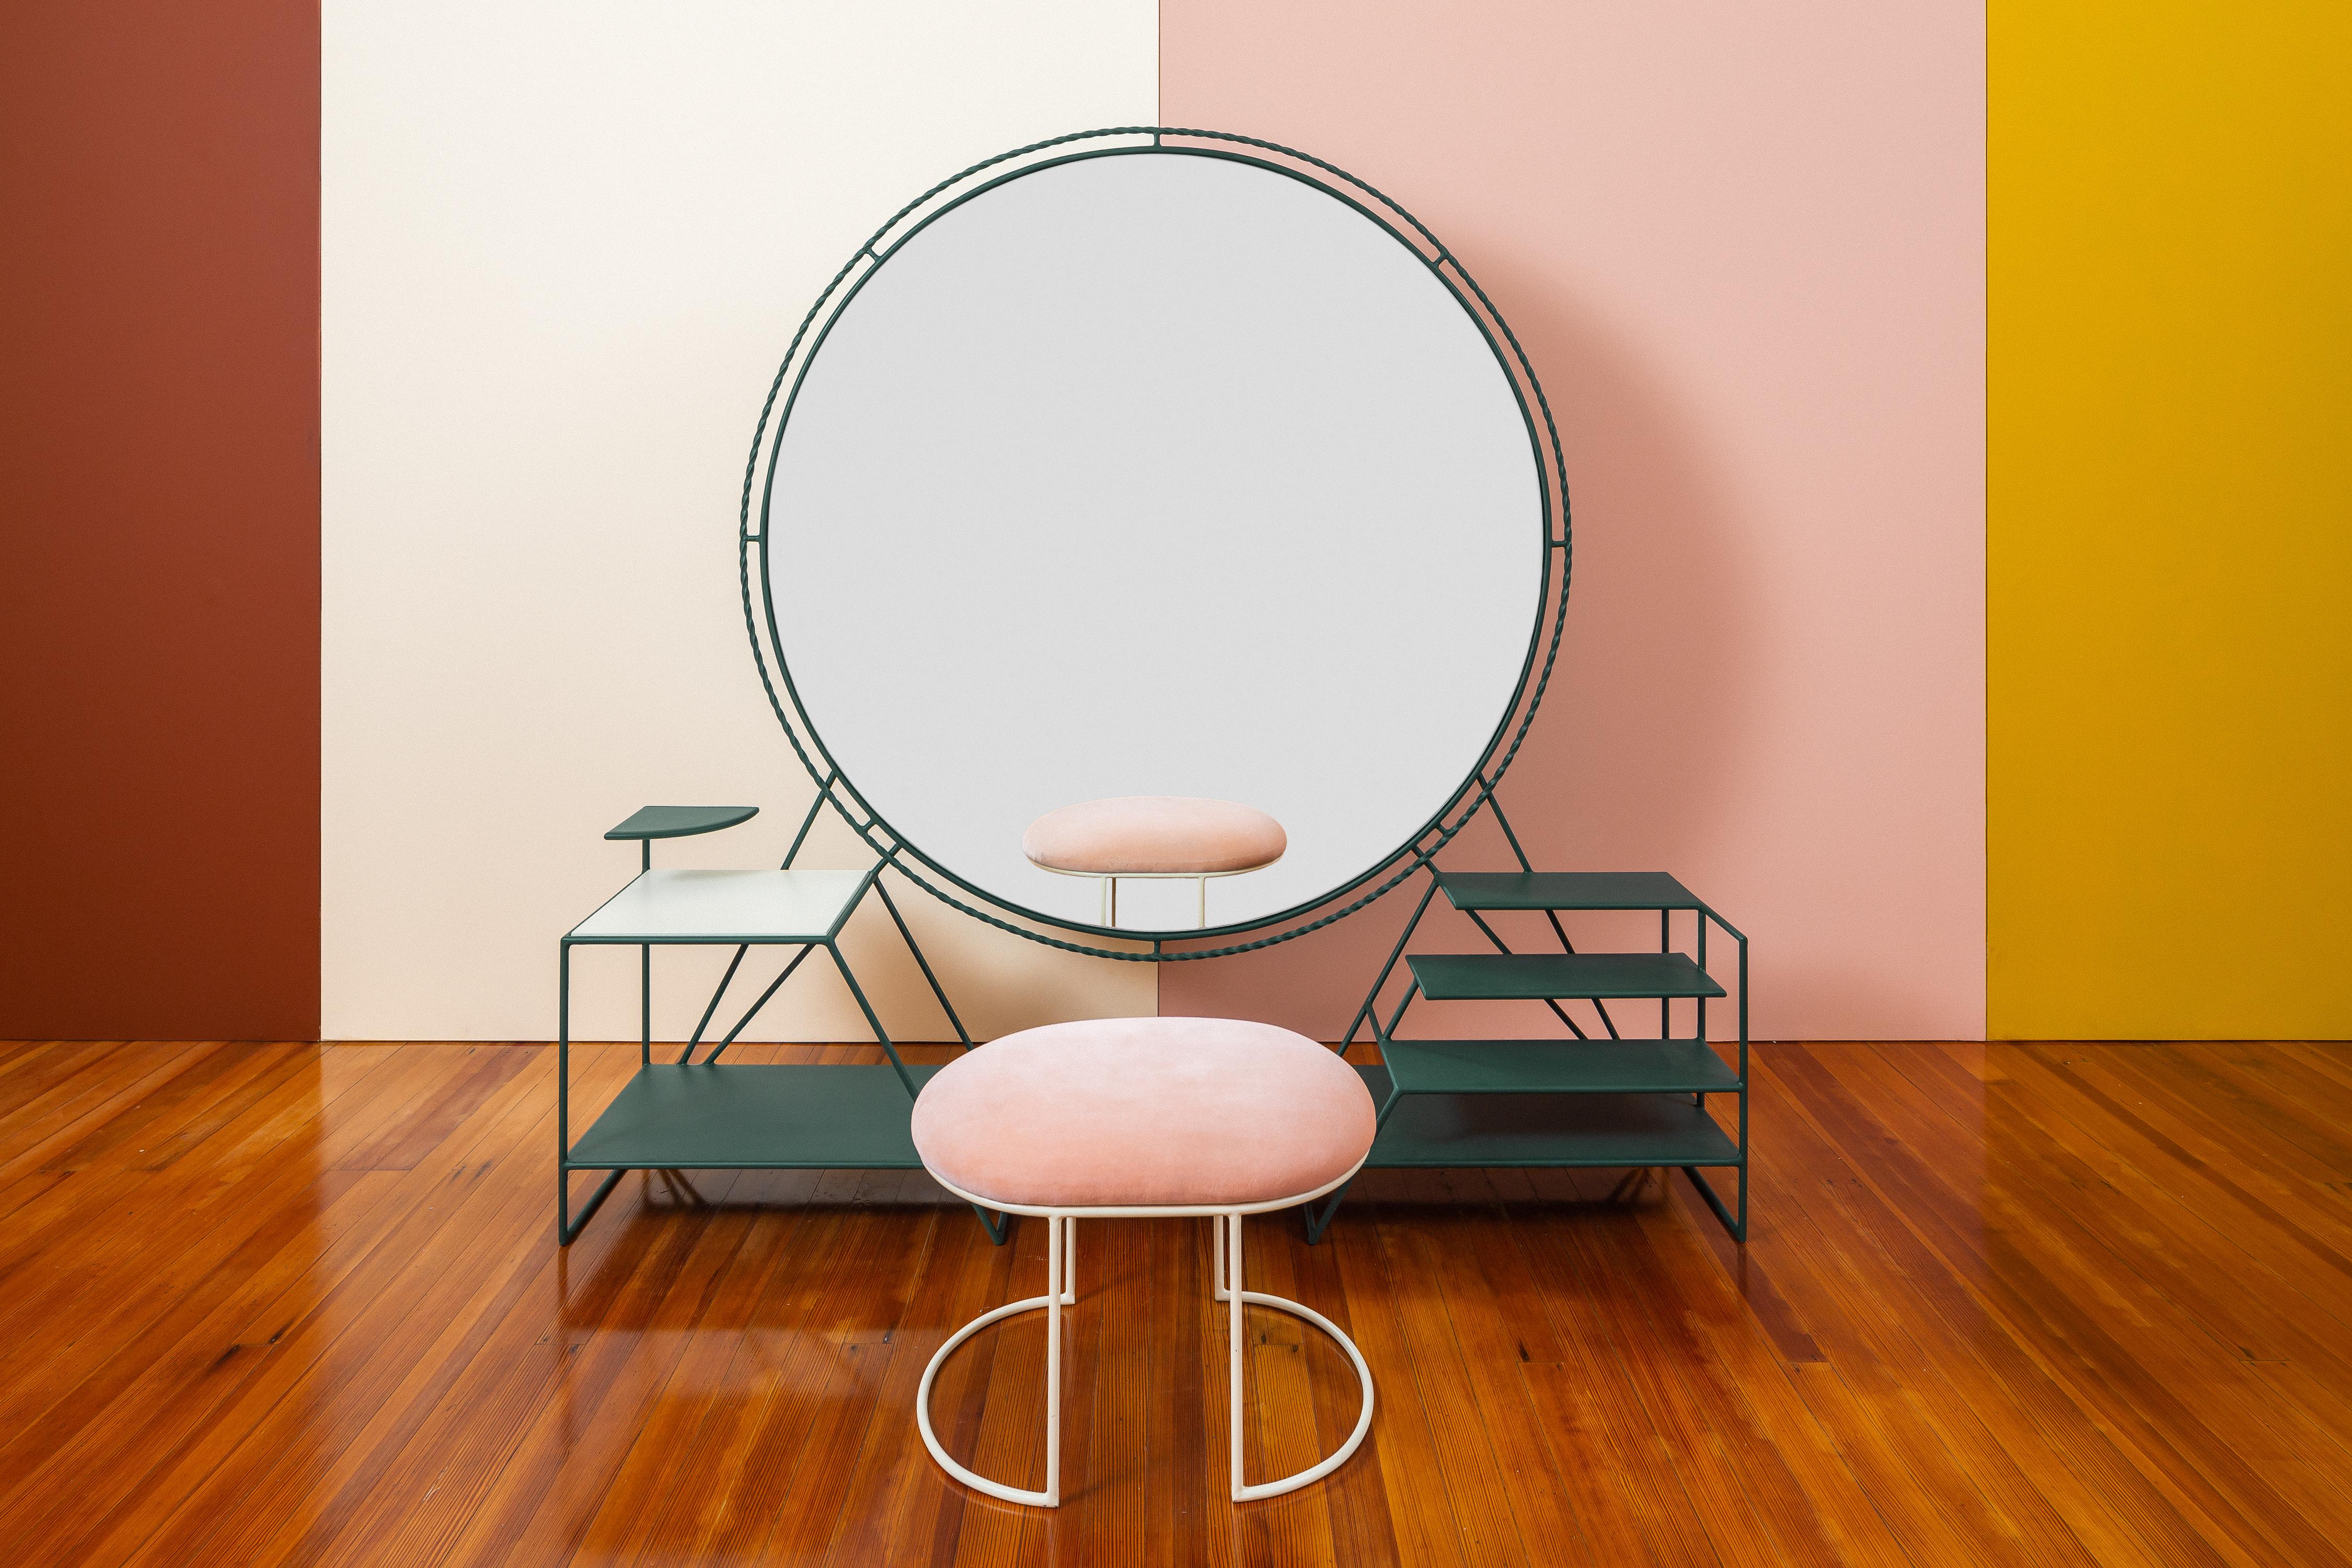 Welcome Vanity and Ottoman by Sofia Alvarado
Unique Piece
Materials: Metal base, guayacan wood, mirror glass
Dimensions: 158cm (H) x 160cm (W) x 35cm (D) / 50 x 40cm ottoman
Green, ivory and pink.

FI is an ornamental artist who embodies the